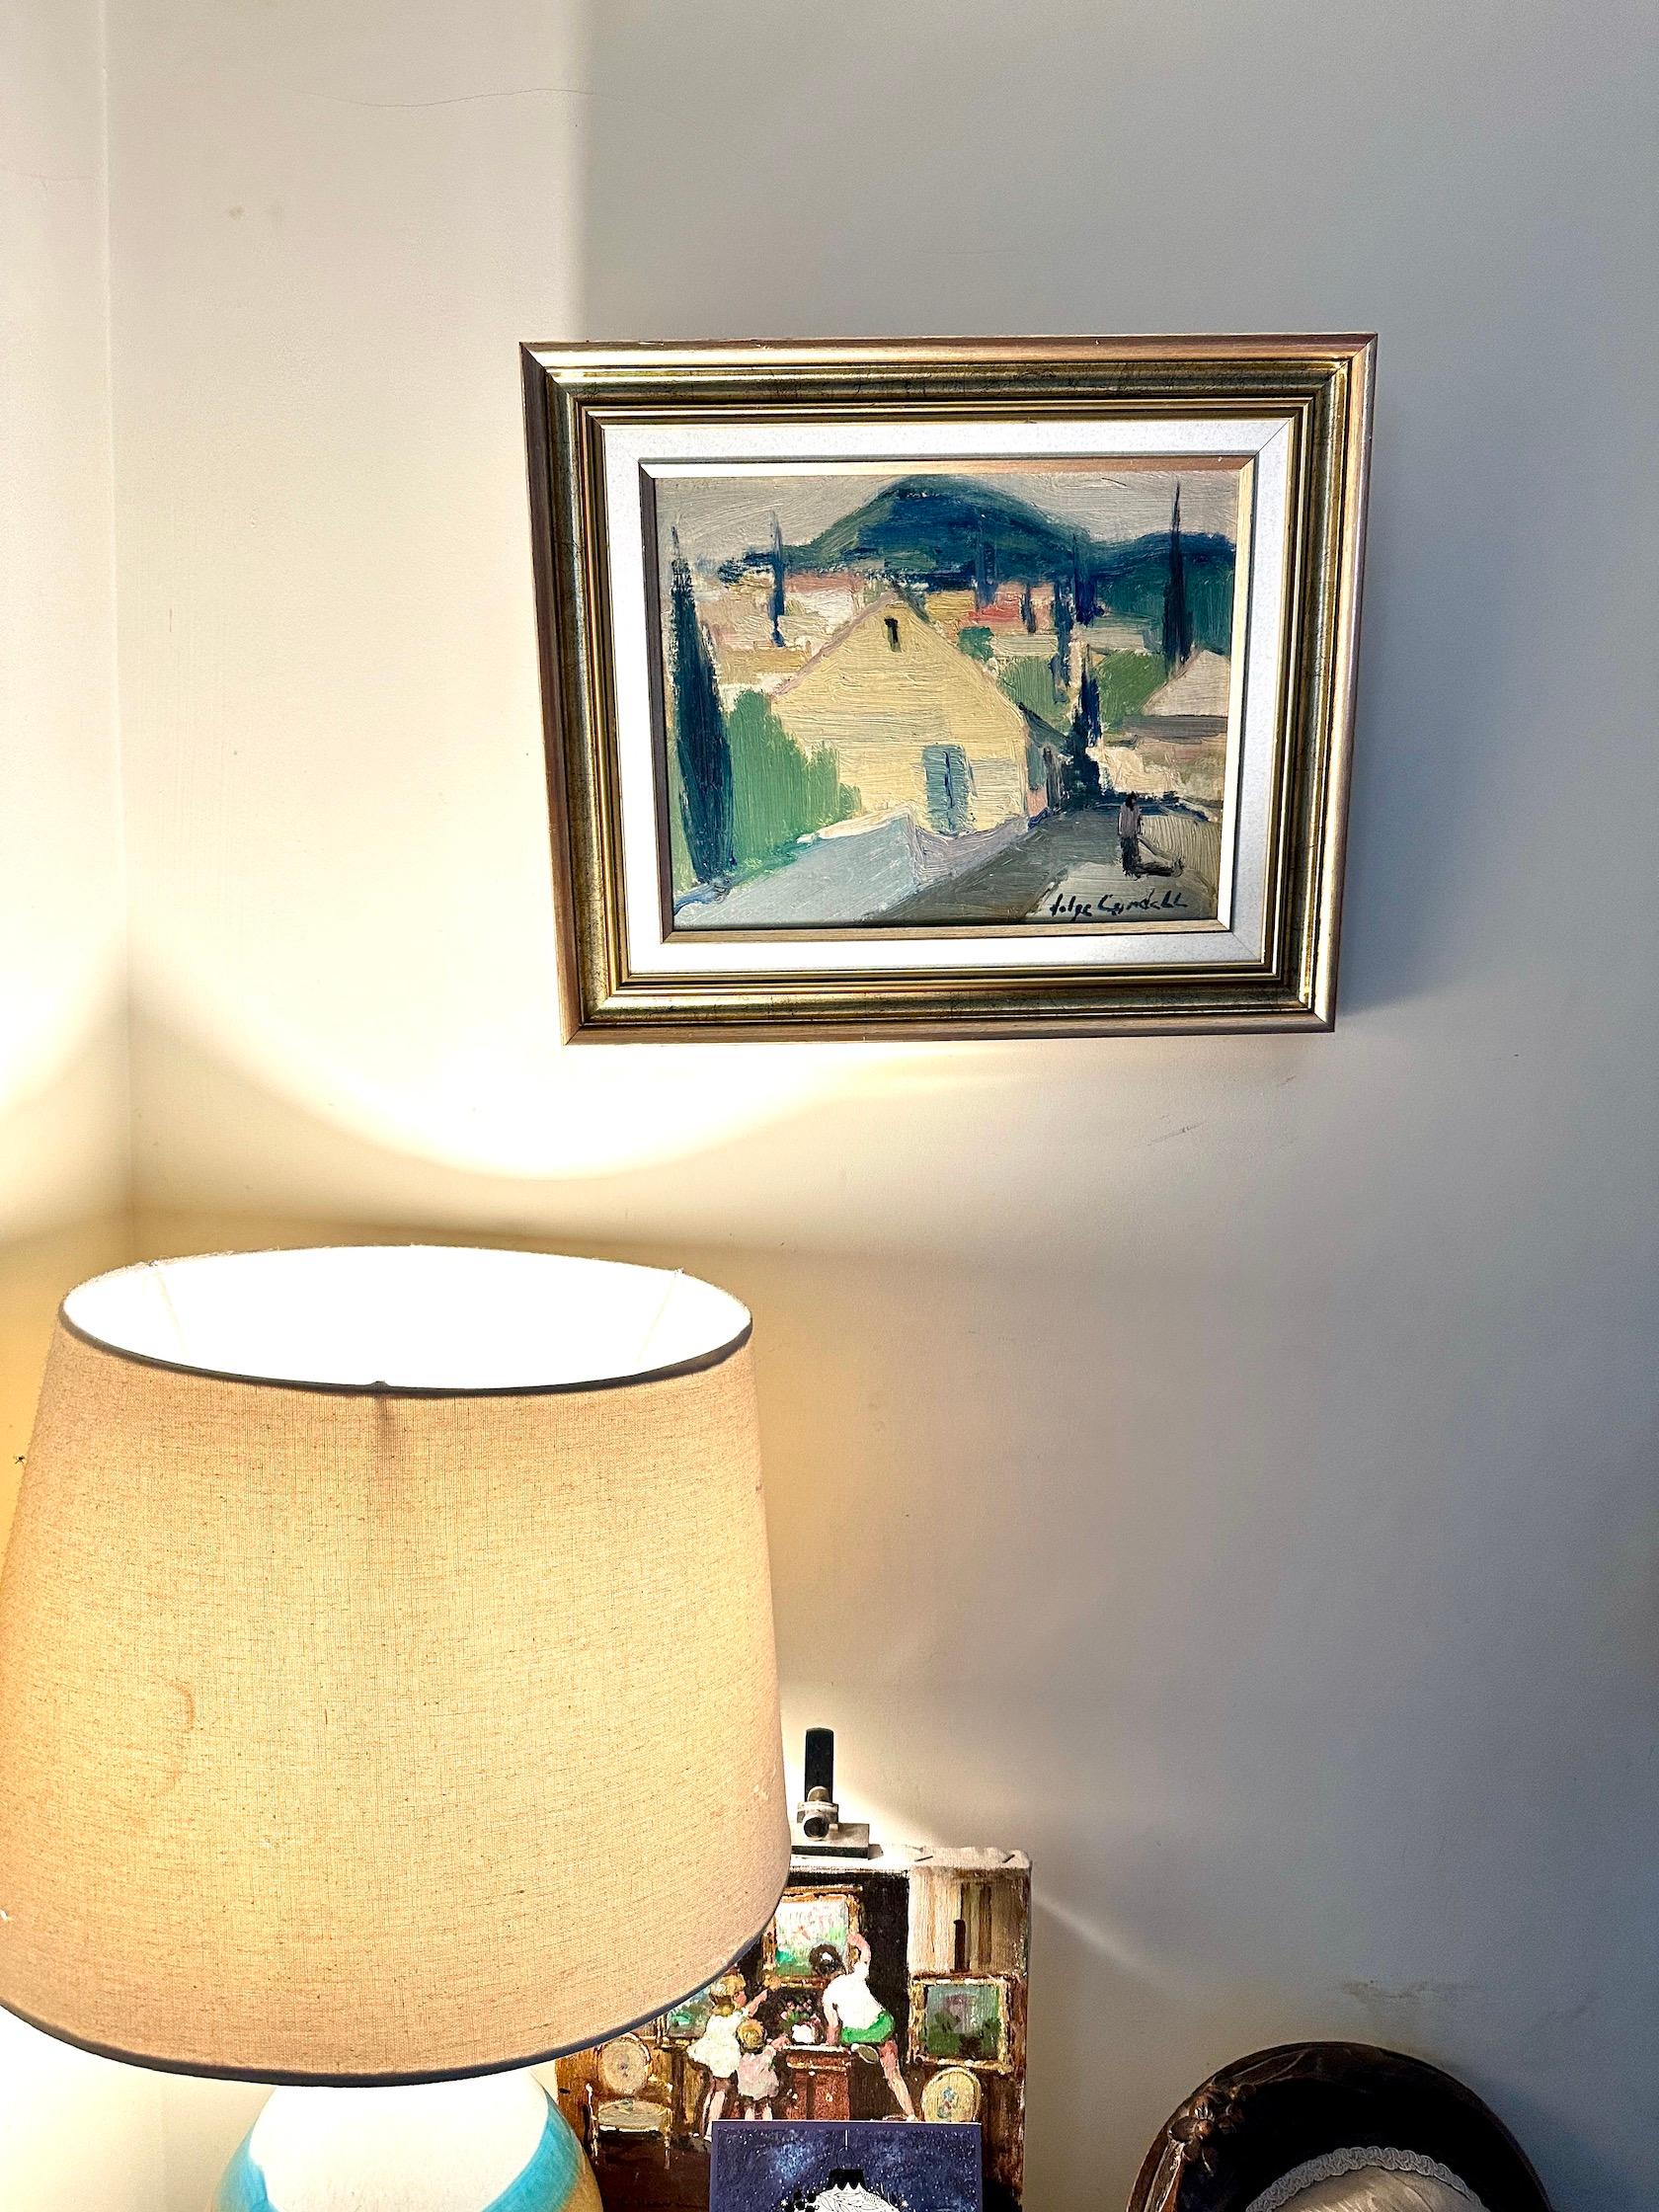 Choosing to acquire a Swedish mid-20th-century modern Impressionist landscape by Helge Cardell is an opportunity to bring a harmonious blend of artistic innovation and natural beauty into your living space. Cardell, a distinguished artist of his